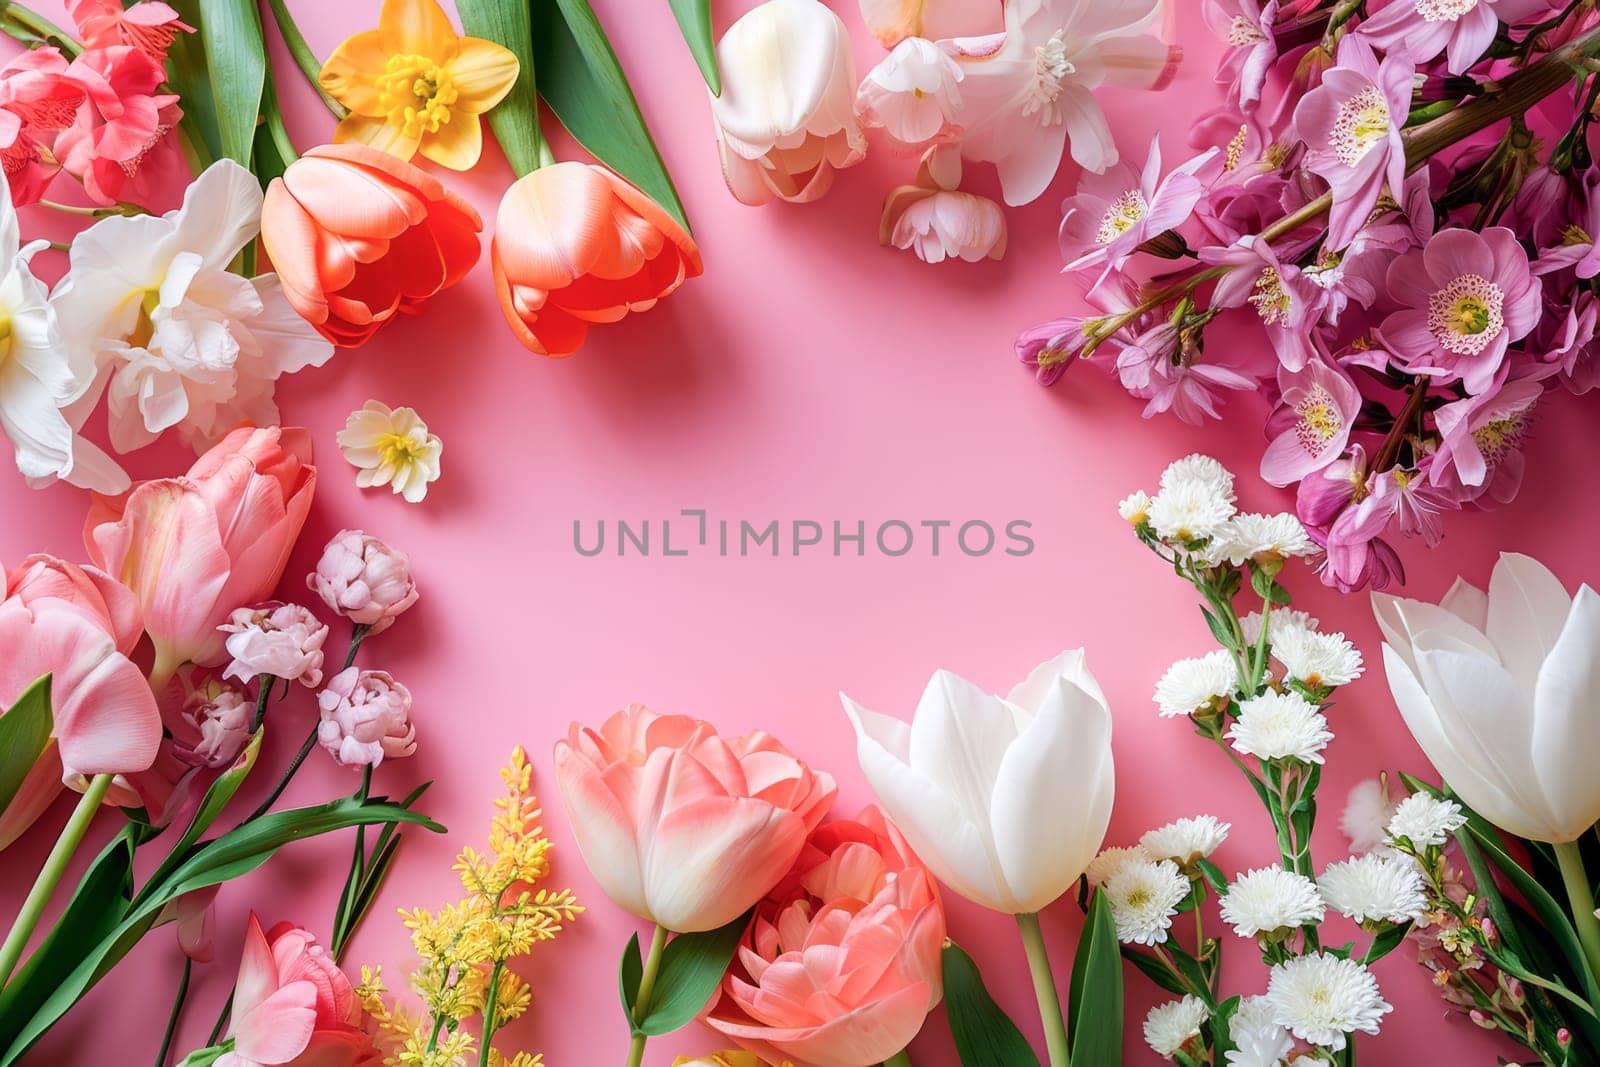 A variety of vibrant flowers arranged neatly on a pink background, creating a visually appealing display.